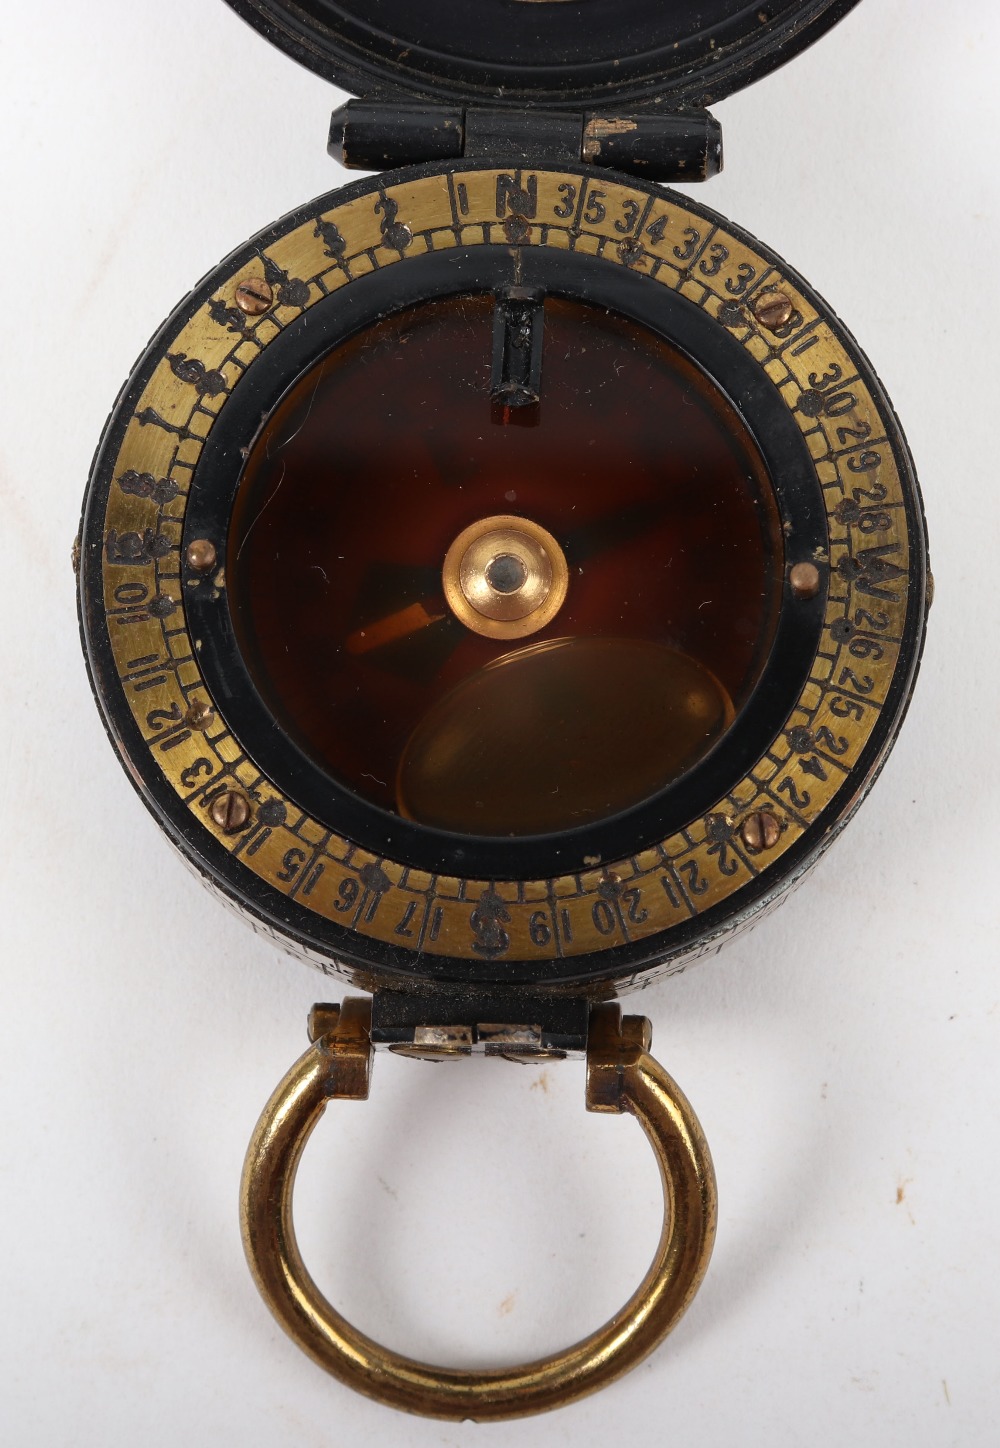 Military Sinclair Reflex Compass and Lamp - Image 12 of 12